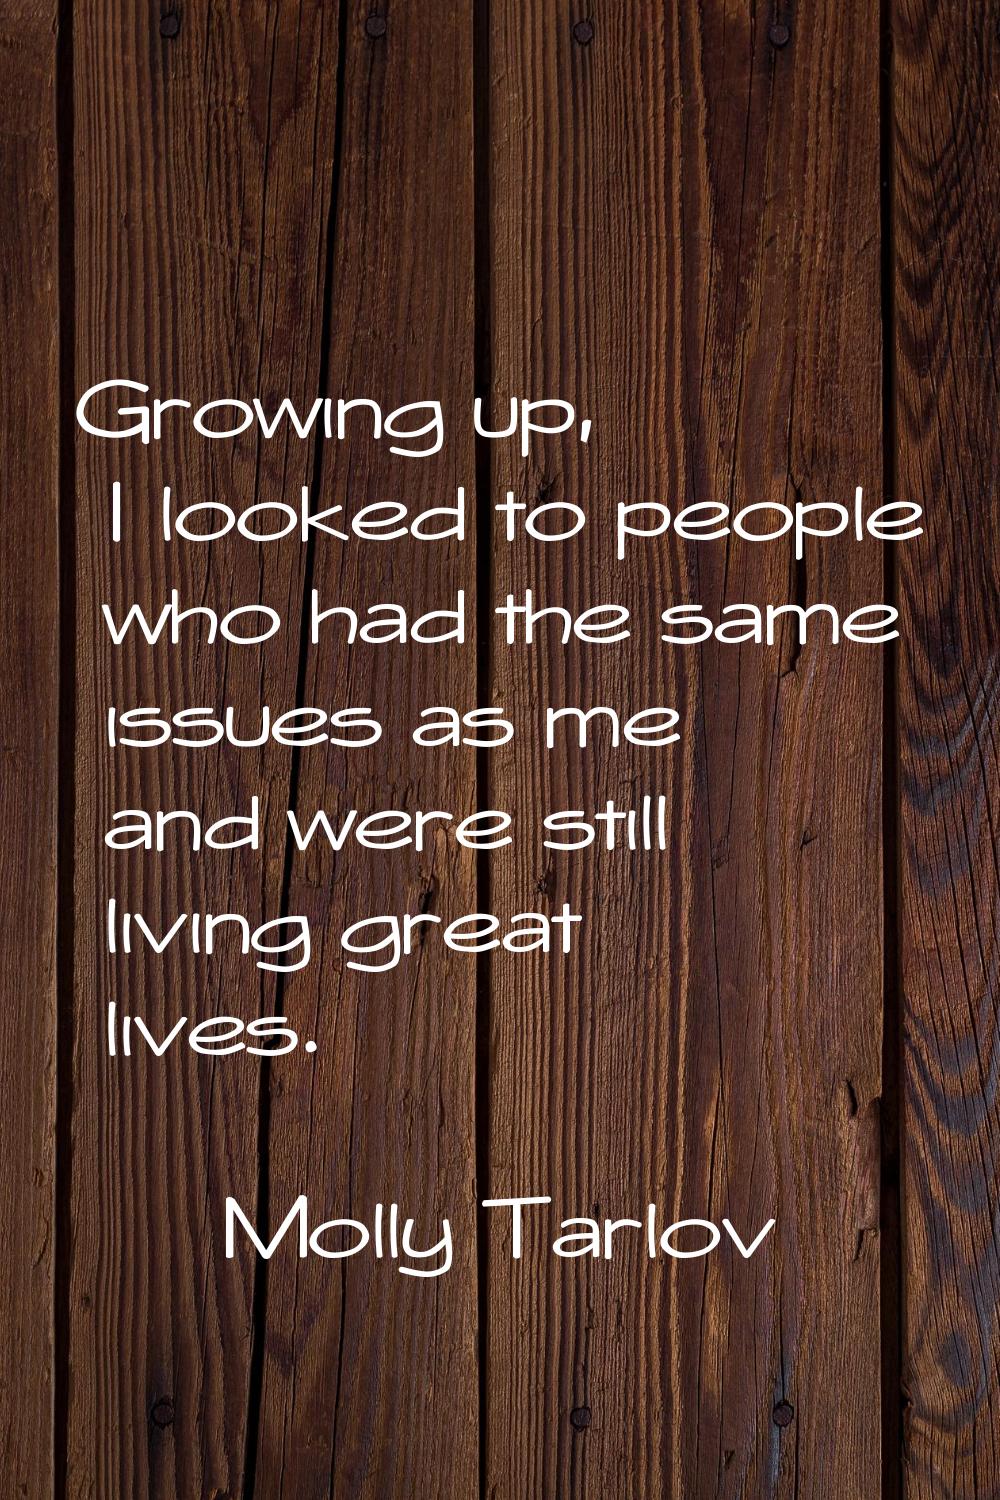 Growing up, I looked to people who had the same issues as me and were still living great lives.